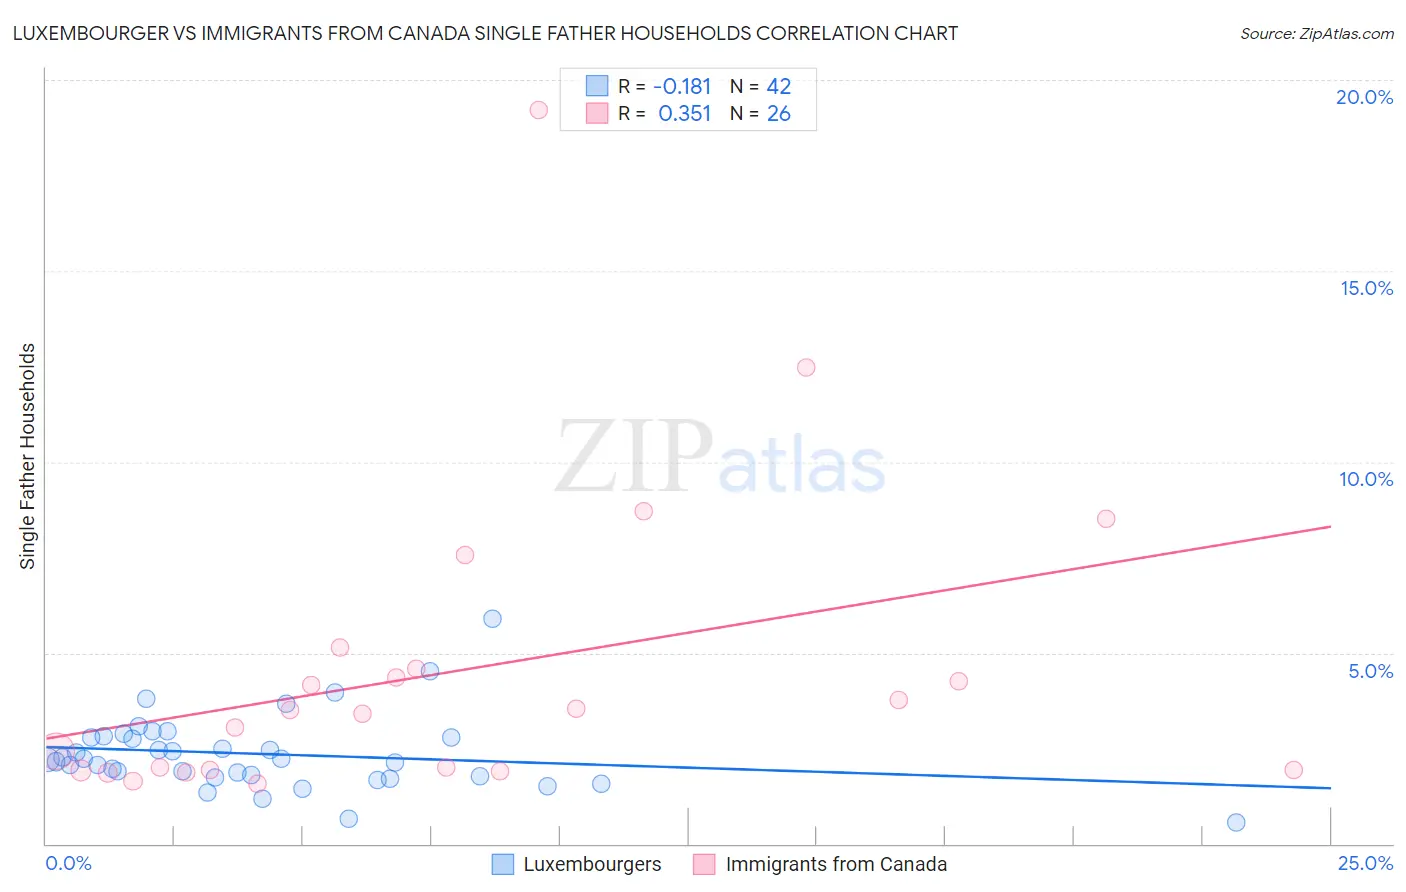 Luxembourger vs Immigrants from Canada Single Father Households